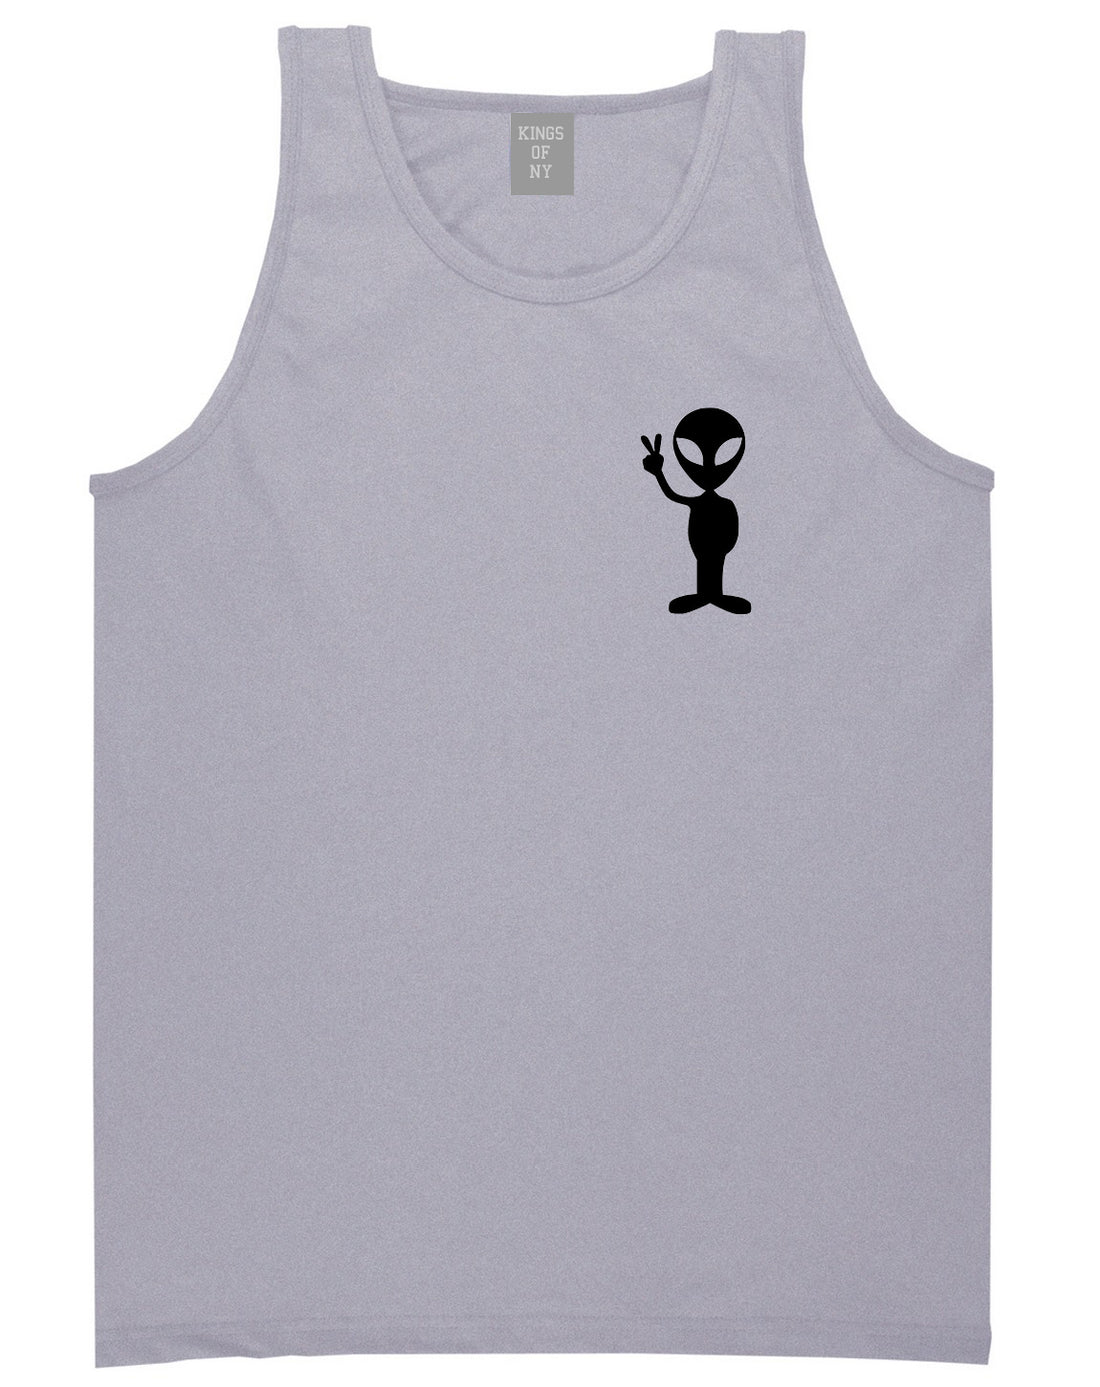 Alien Peace Sign Chest Grey Tank Top Shirt by Kings Of NY